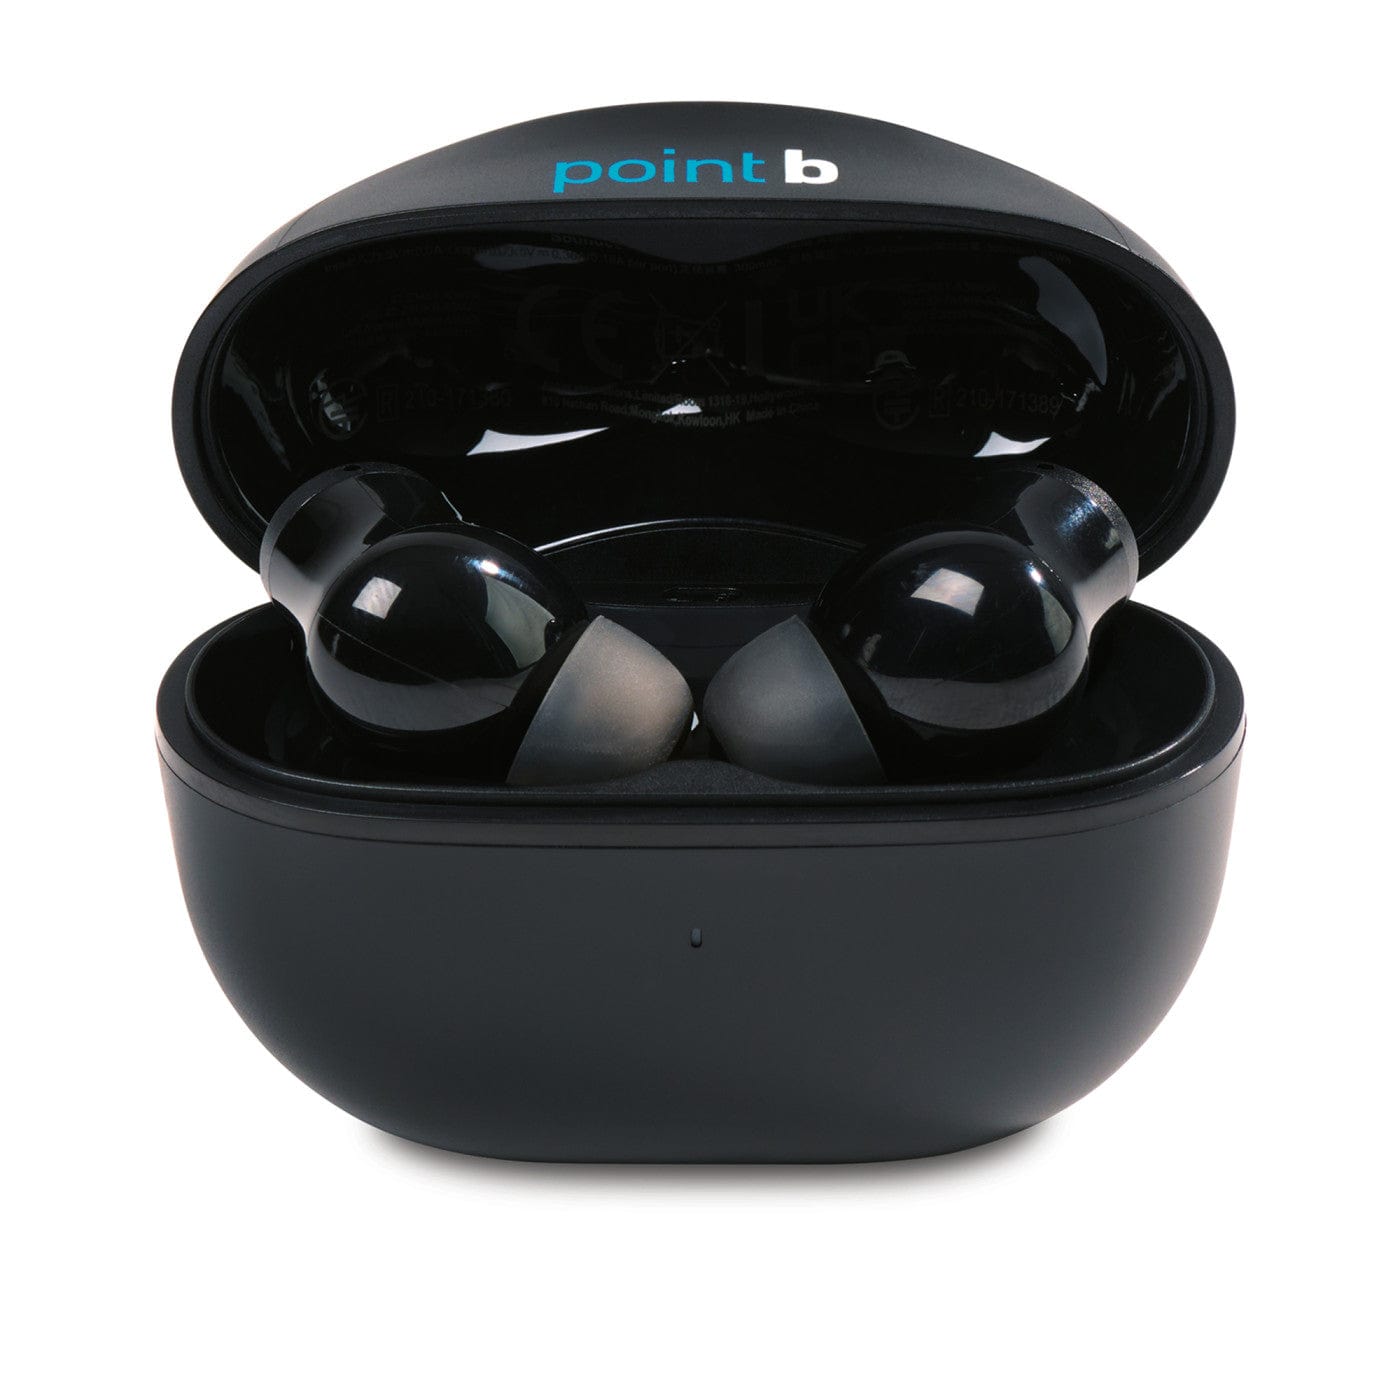 Anker - Soundcore Life Note 3i True Wireless Bluetooth Earbuds 